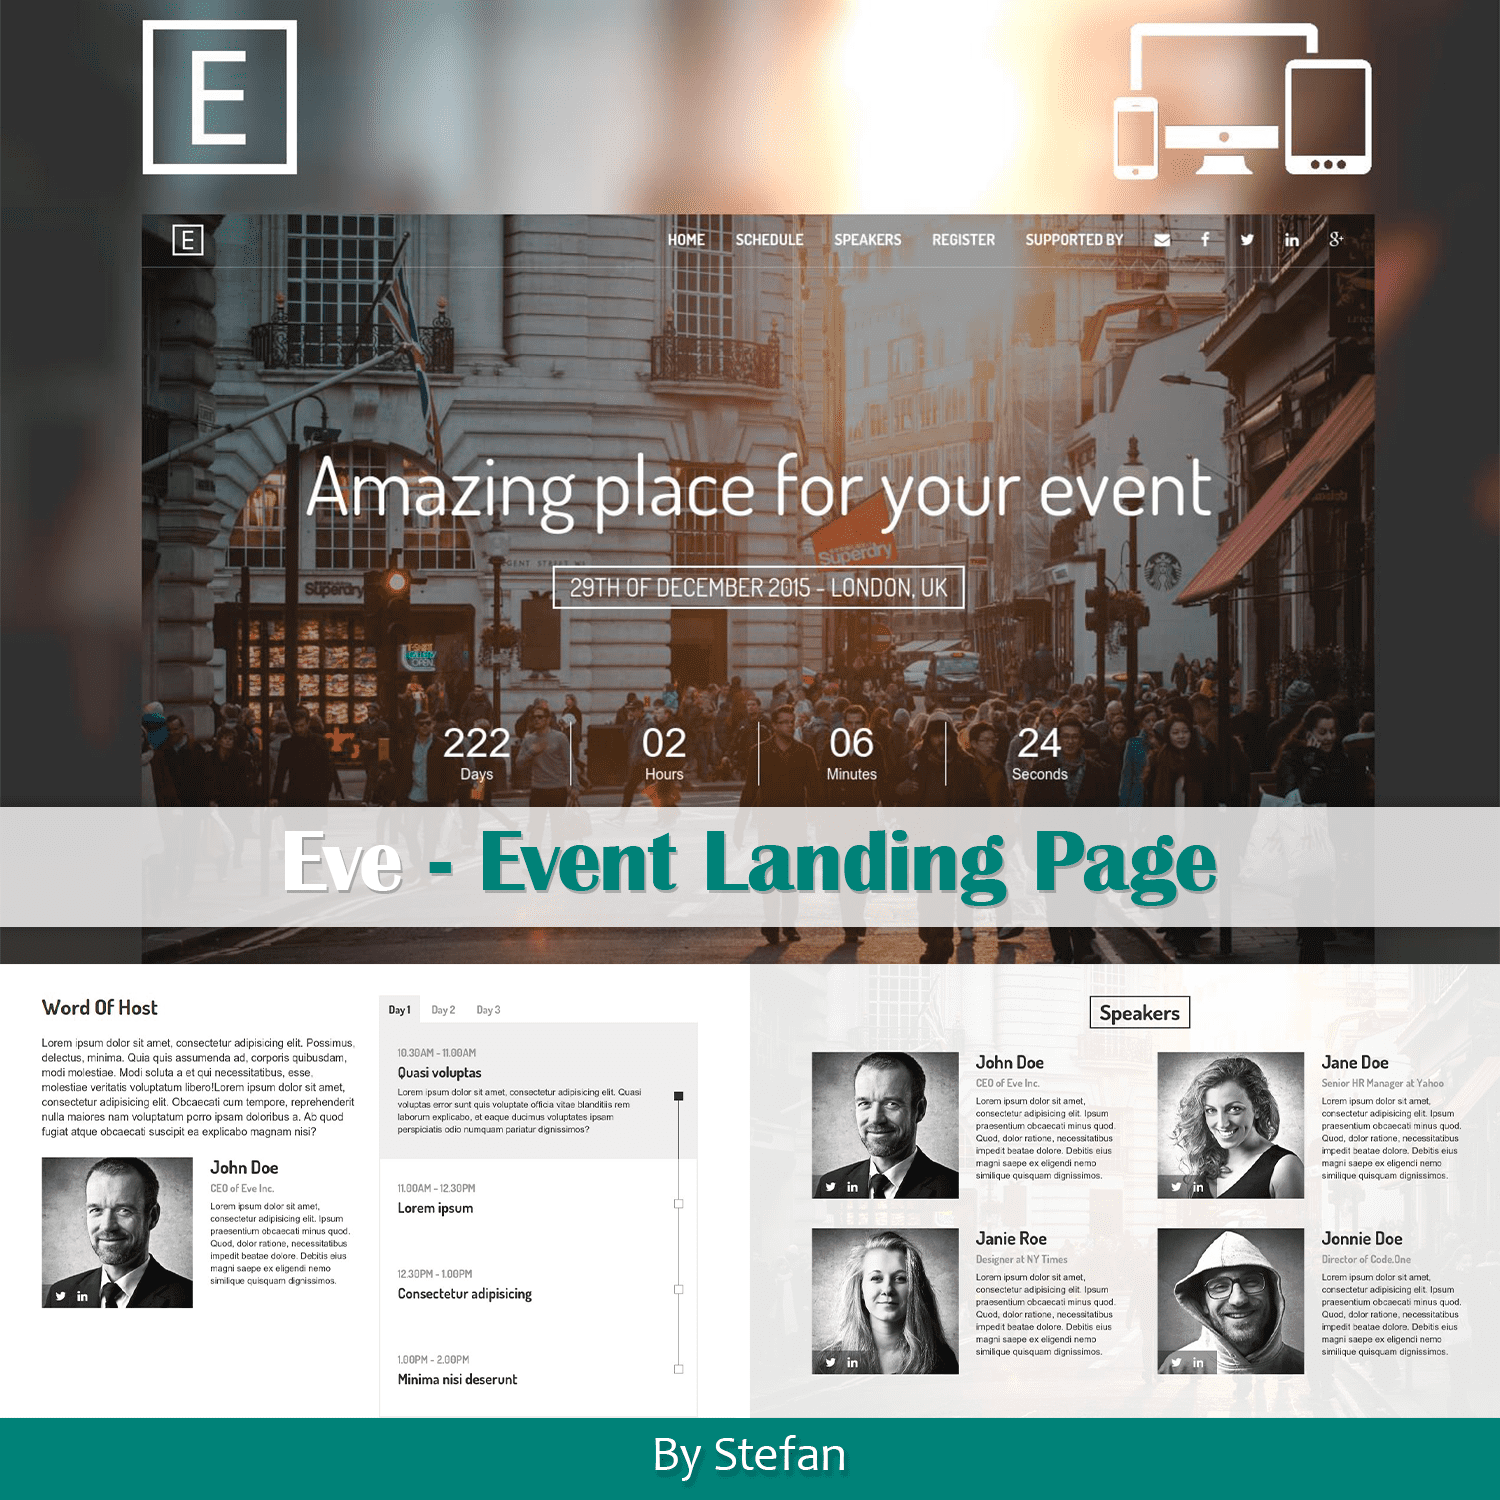 Eve - Event Landing Page cover.